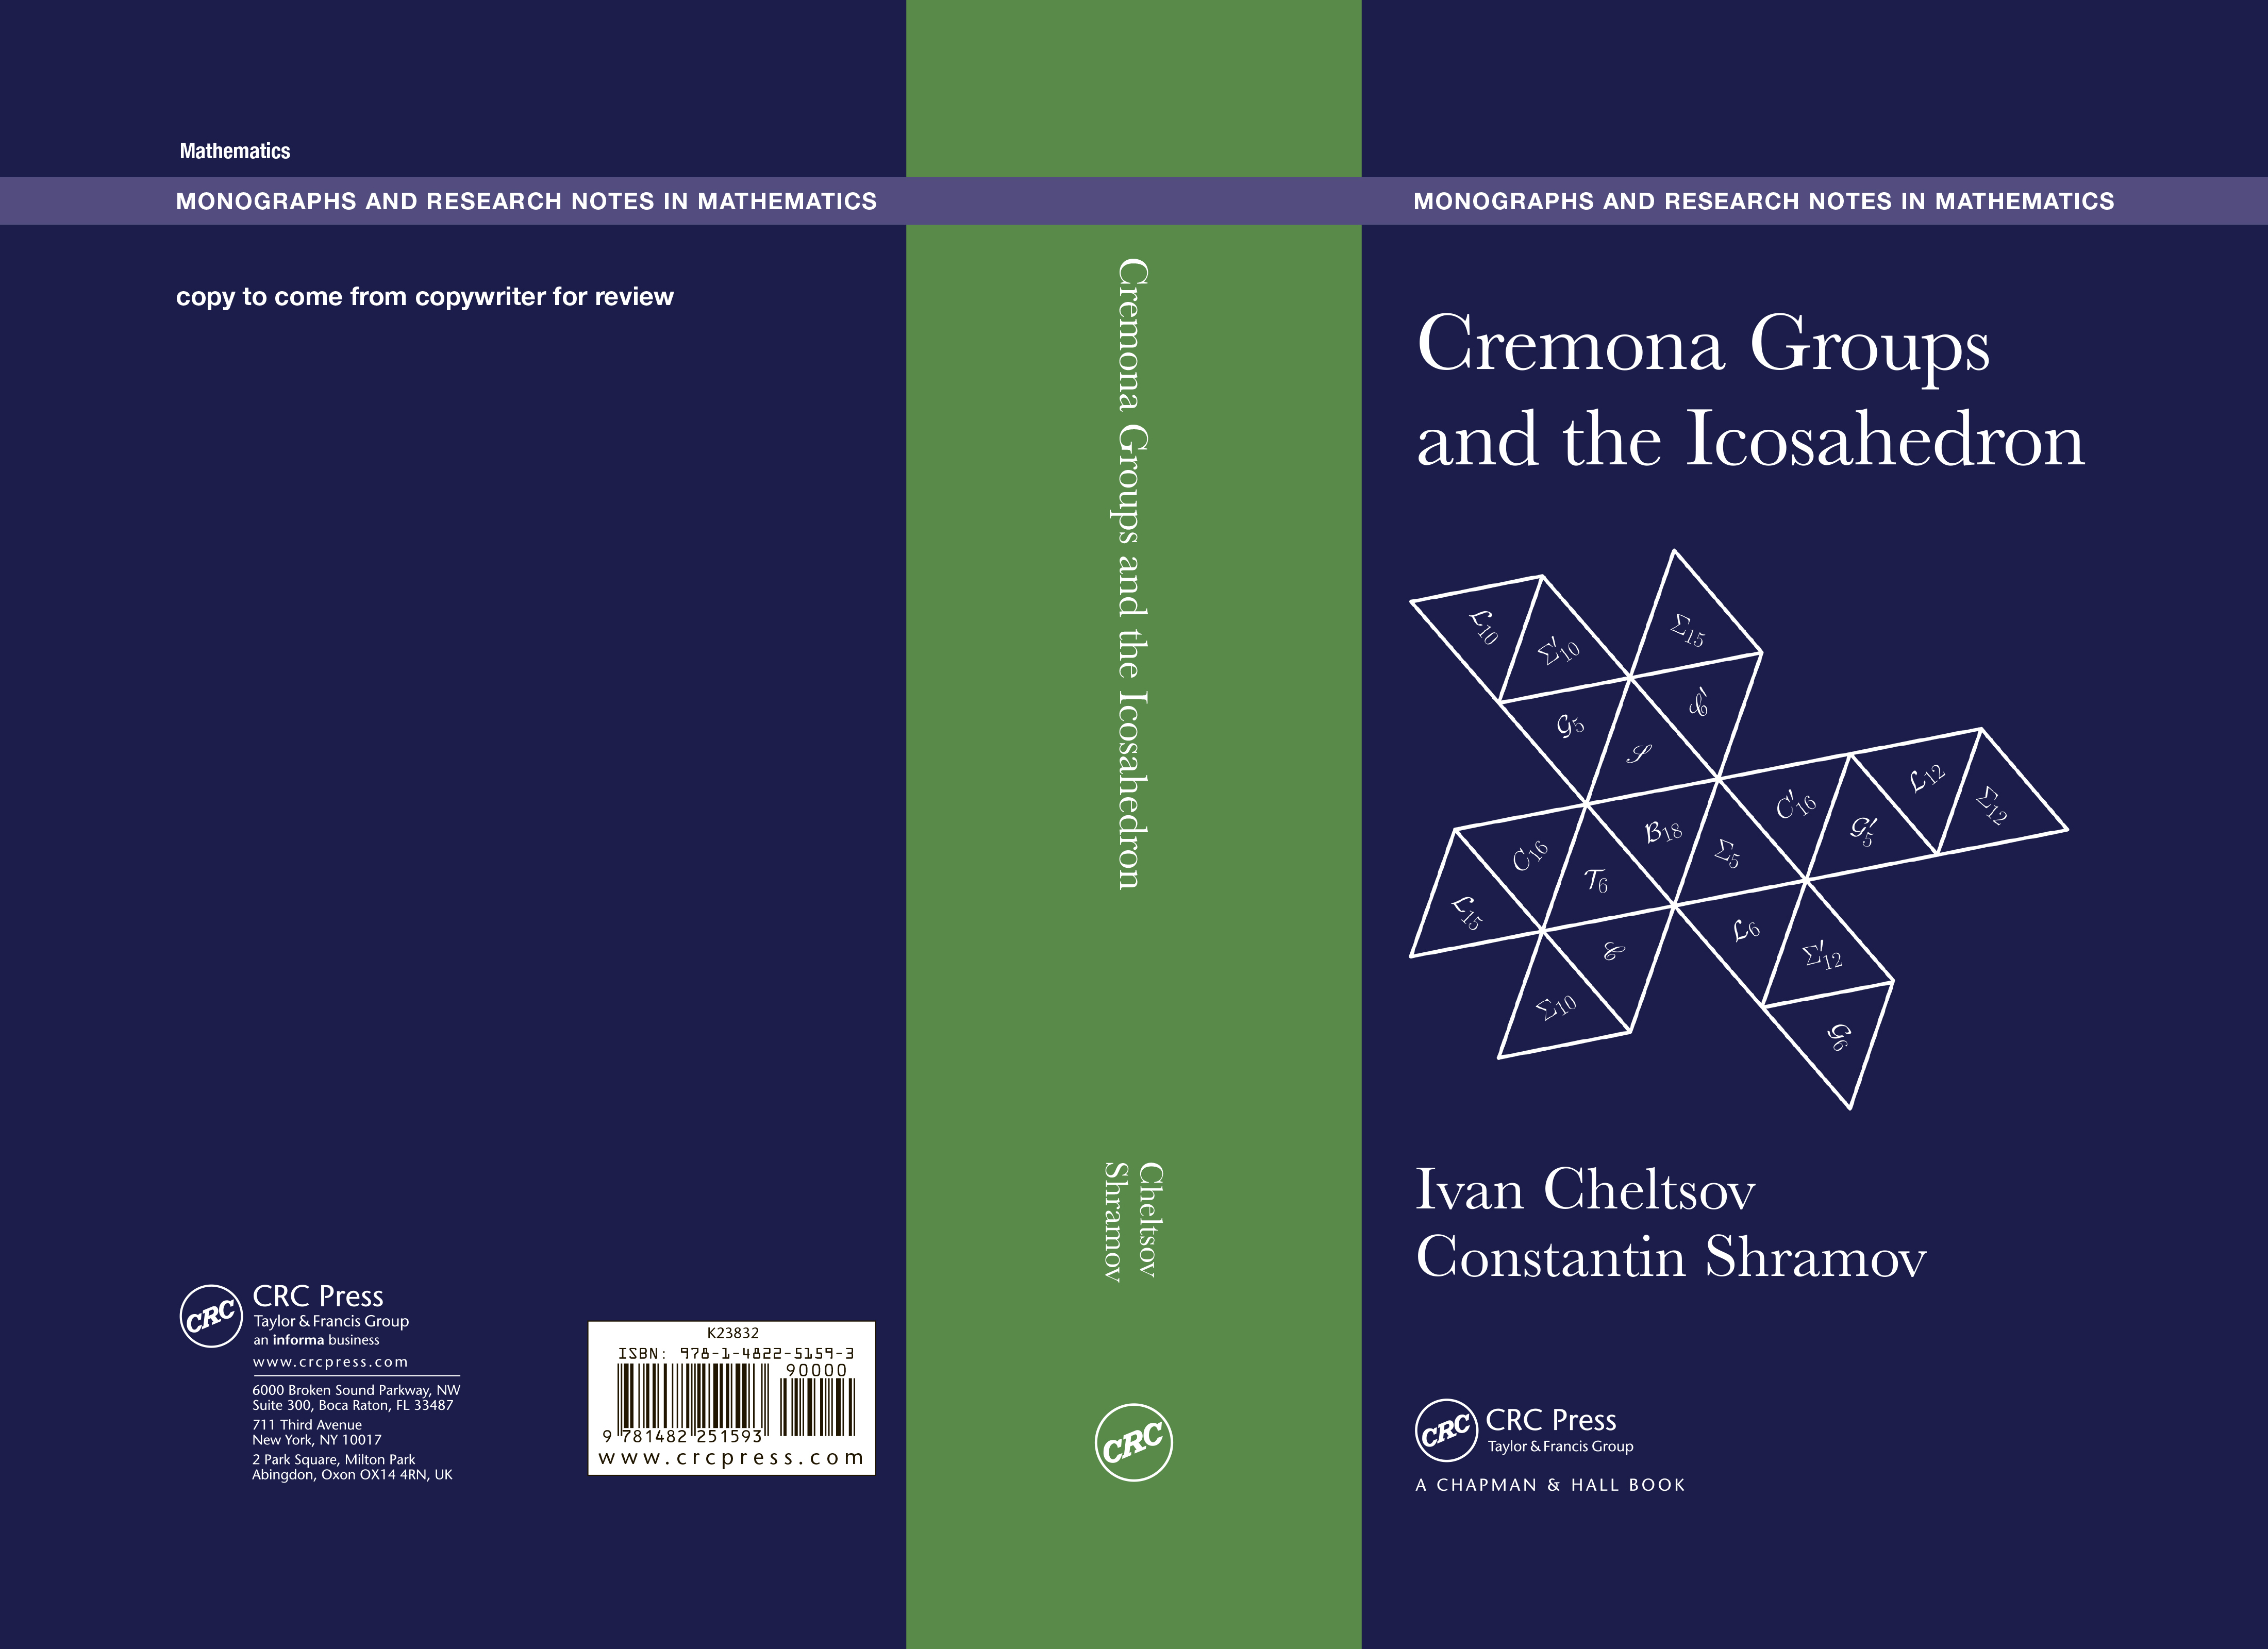 Cremona groups and the icosahedron